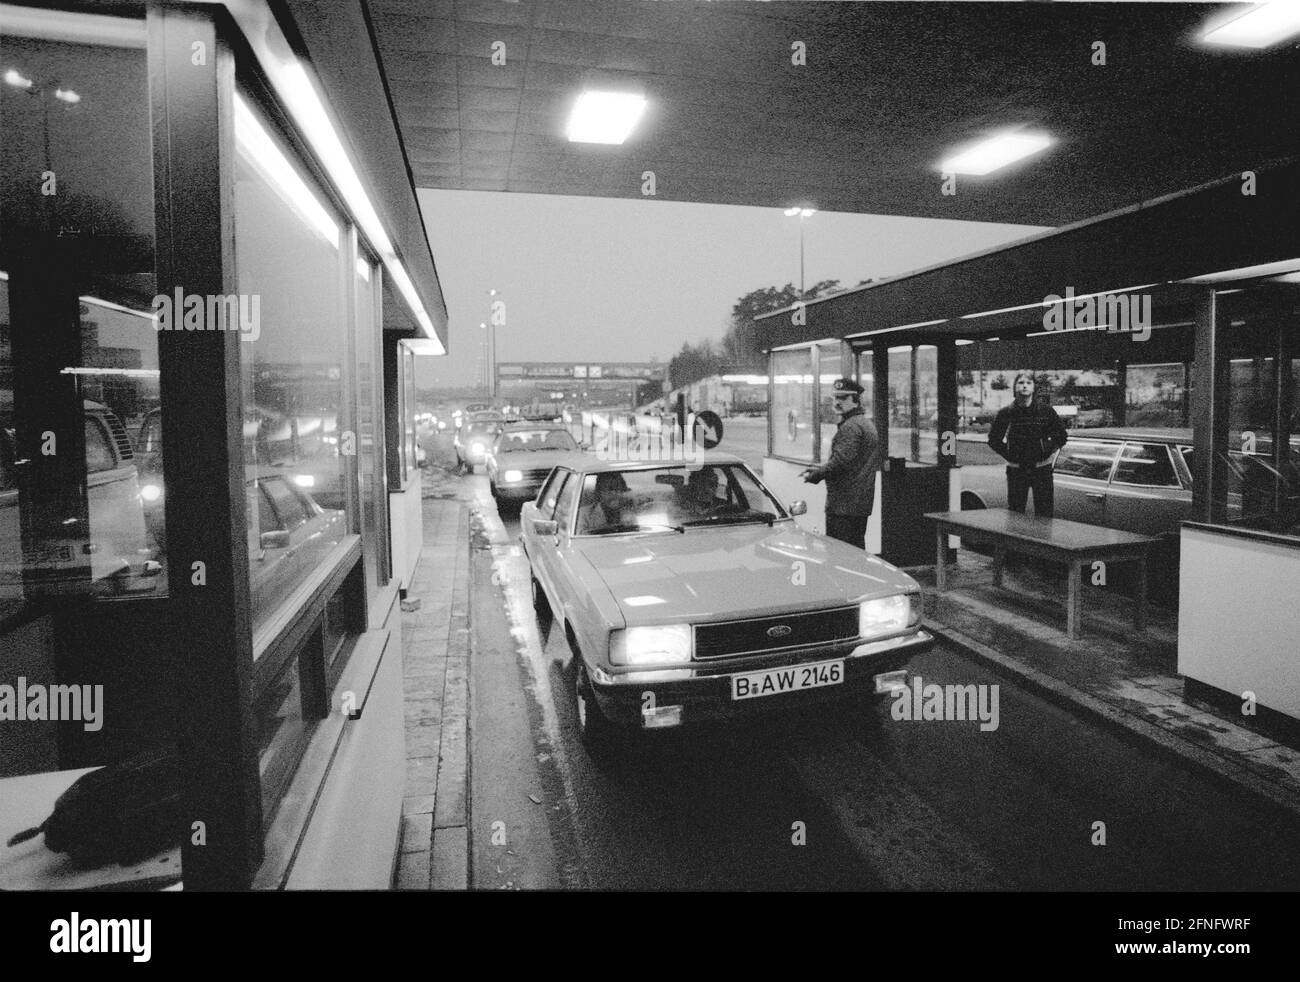 Berlin-Boroughs / GDR / Wall / 20.12.1978 Zehlendorf: Border crossing Dreilinden. There one left West Berlin in the direction of Hanover or Munich. -You are leaving the american sector- indicates the occupation status of West-Berlin. Zehlendorf was American sector. The USA was responsible for the crossing of Checkpoint Bravo. Photo: West Berlin customs officer // Border / History / Communism [automated translation] Stock Photo